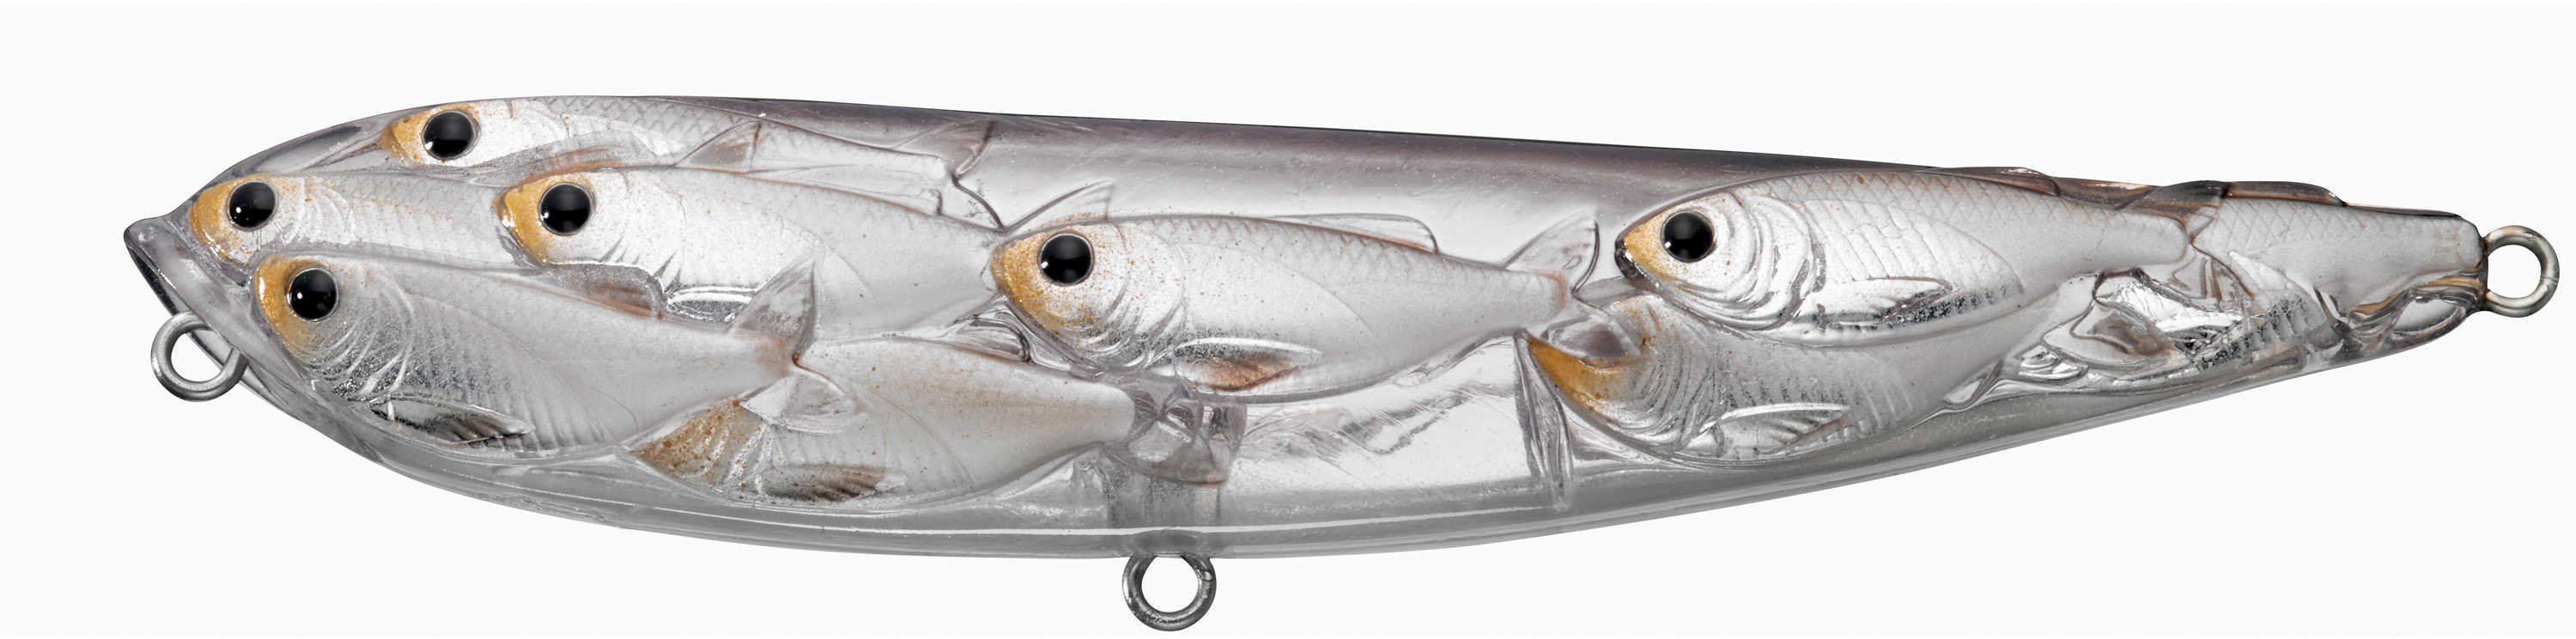 LIVETARGET Lures / Koppers Fishing and Tackle Corp Yearling Baitball Walking Pearl/Natural #4 Md: YWB115T816